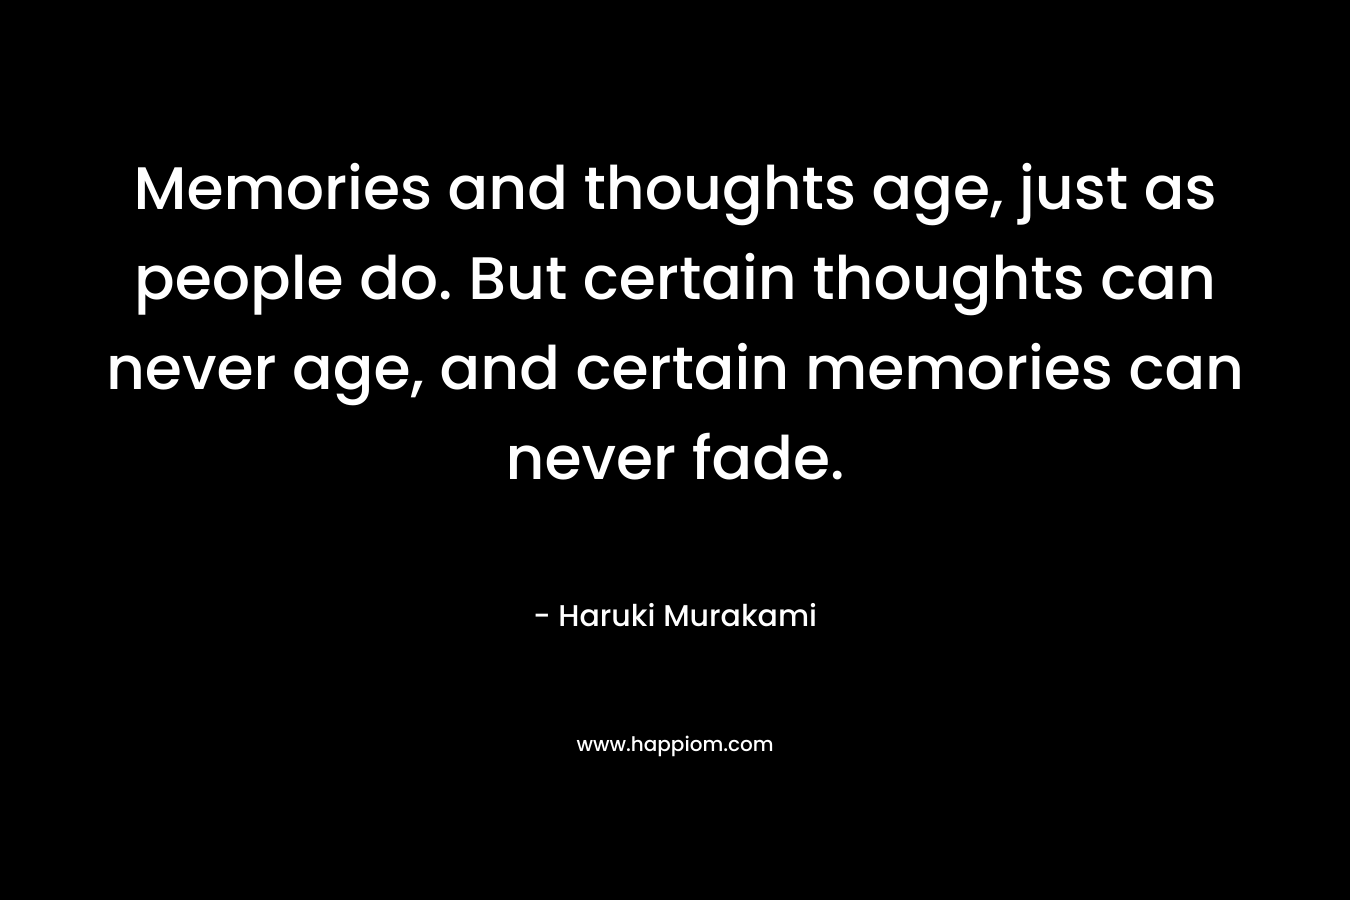 Memories and thoughts age, just as people do. But certain thoughts can never age, and certain memories can never fade. – Haruki Murakami